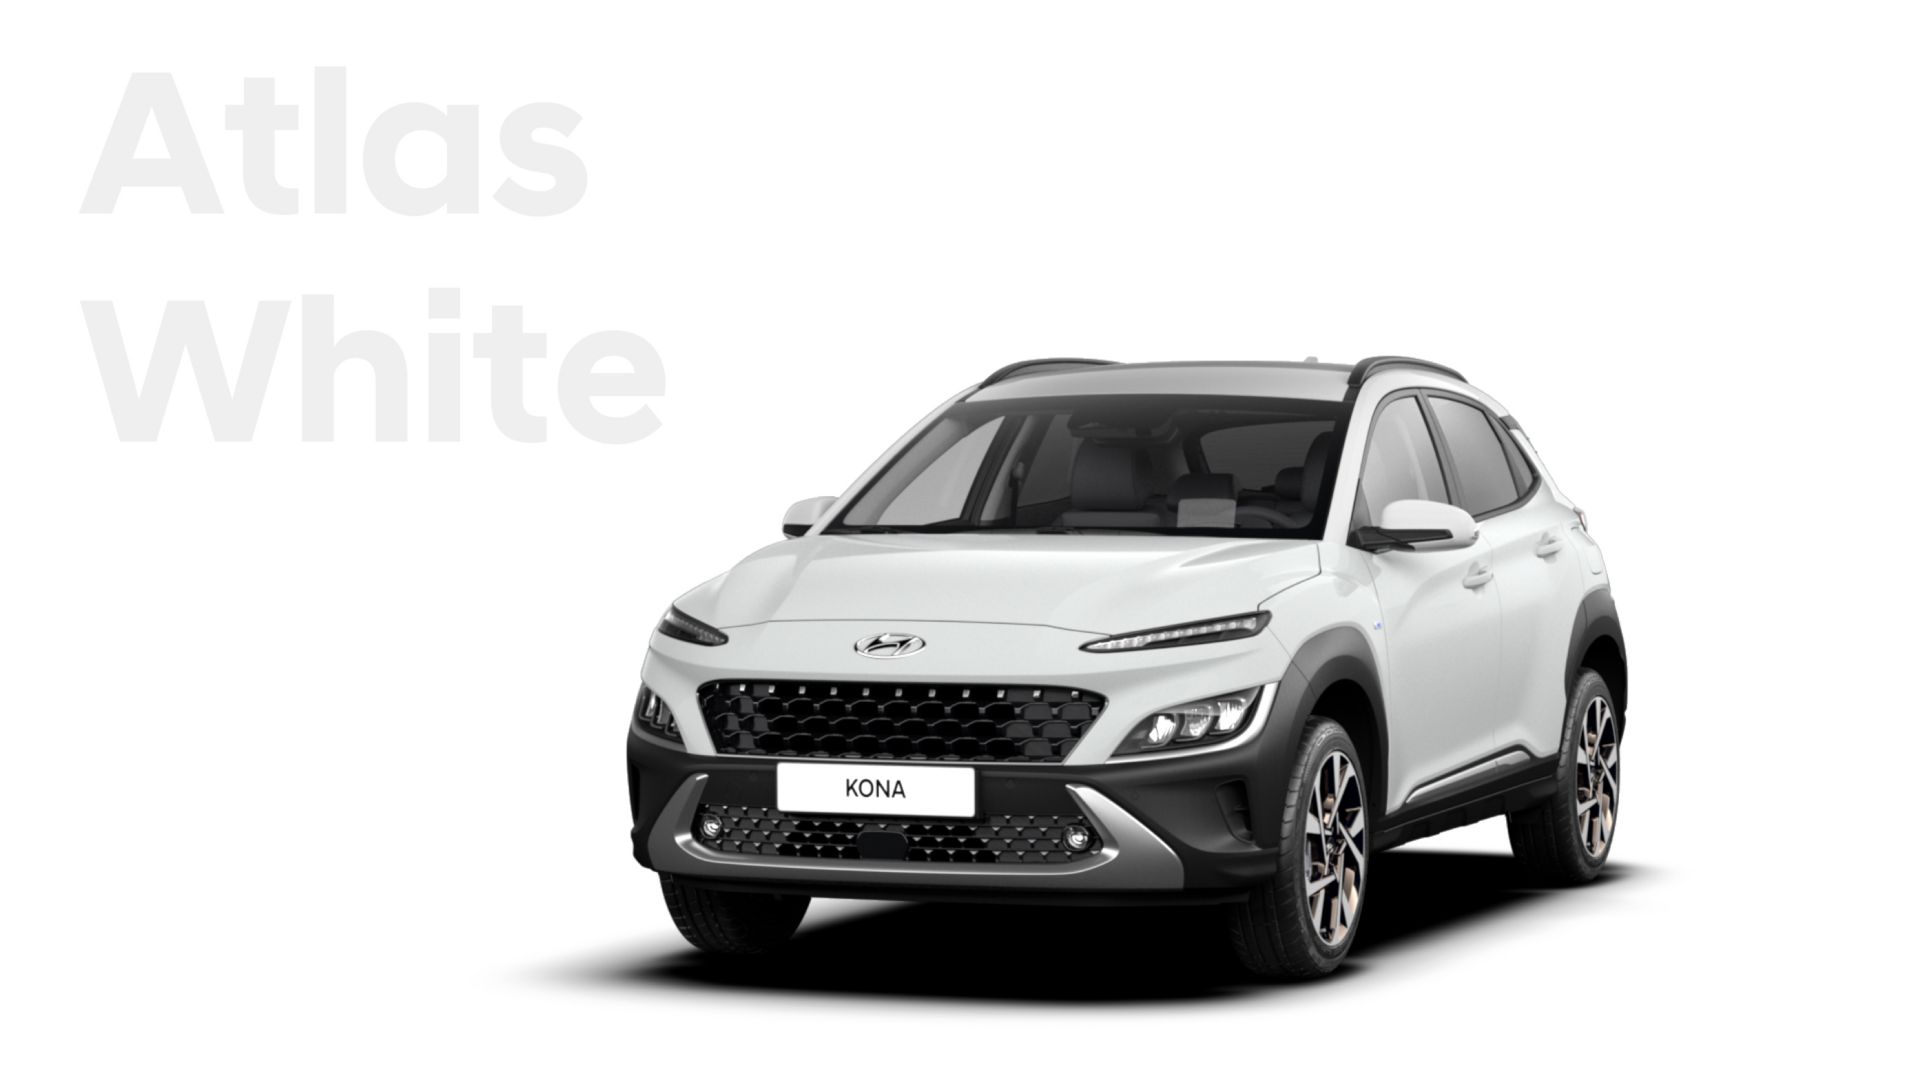 The new great variety of colour options of the new Hyundai Kona: Atlas White.